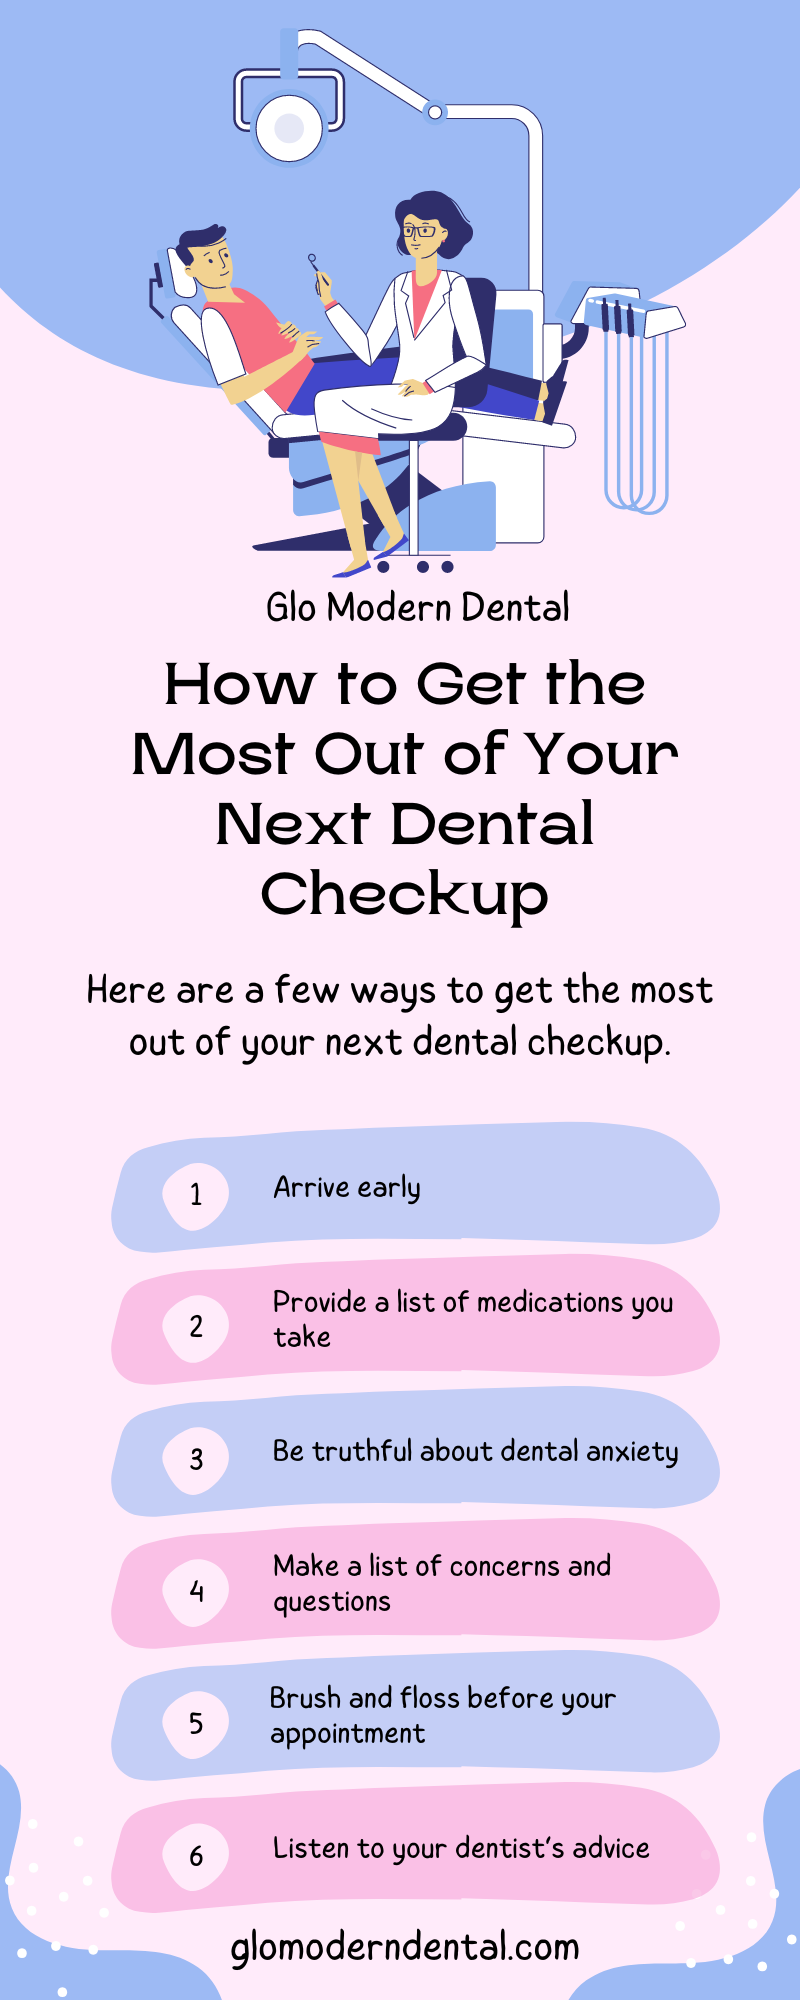 How to Get the Most Out of Your Next Dental Checkup Infographic